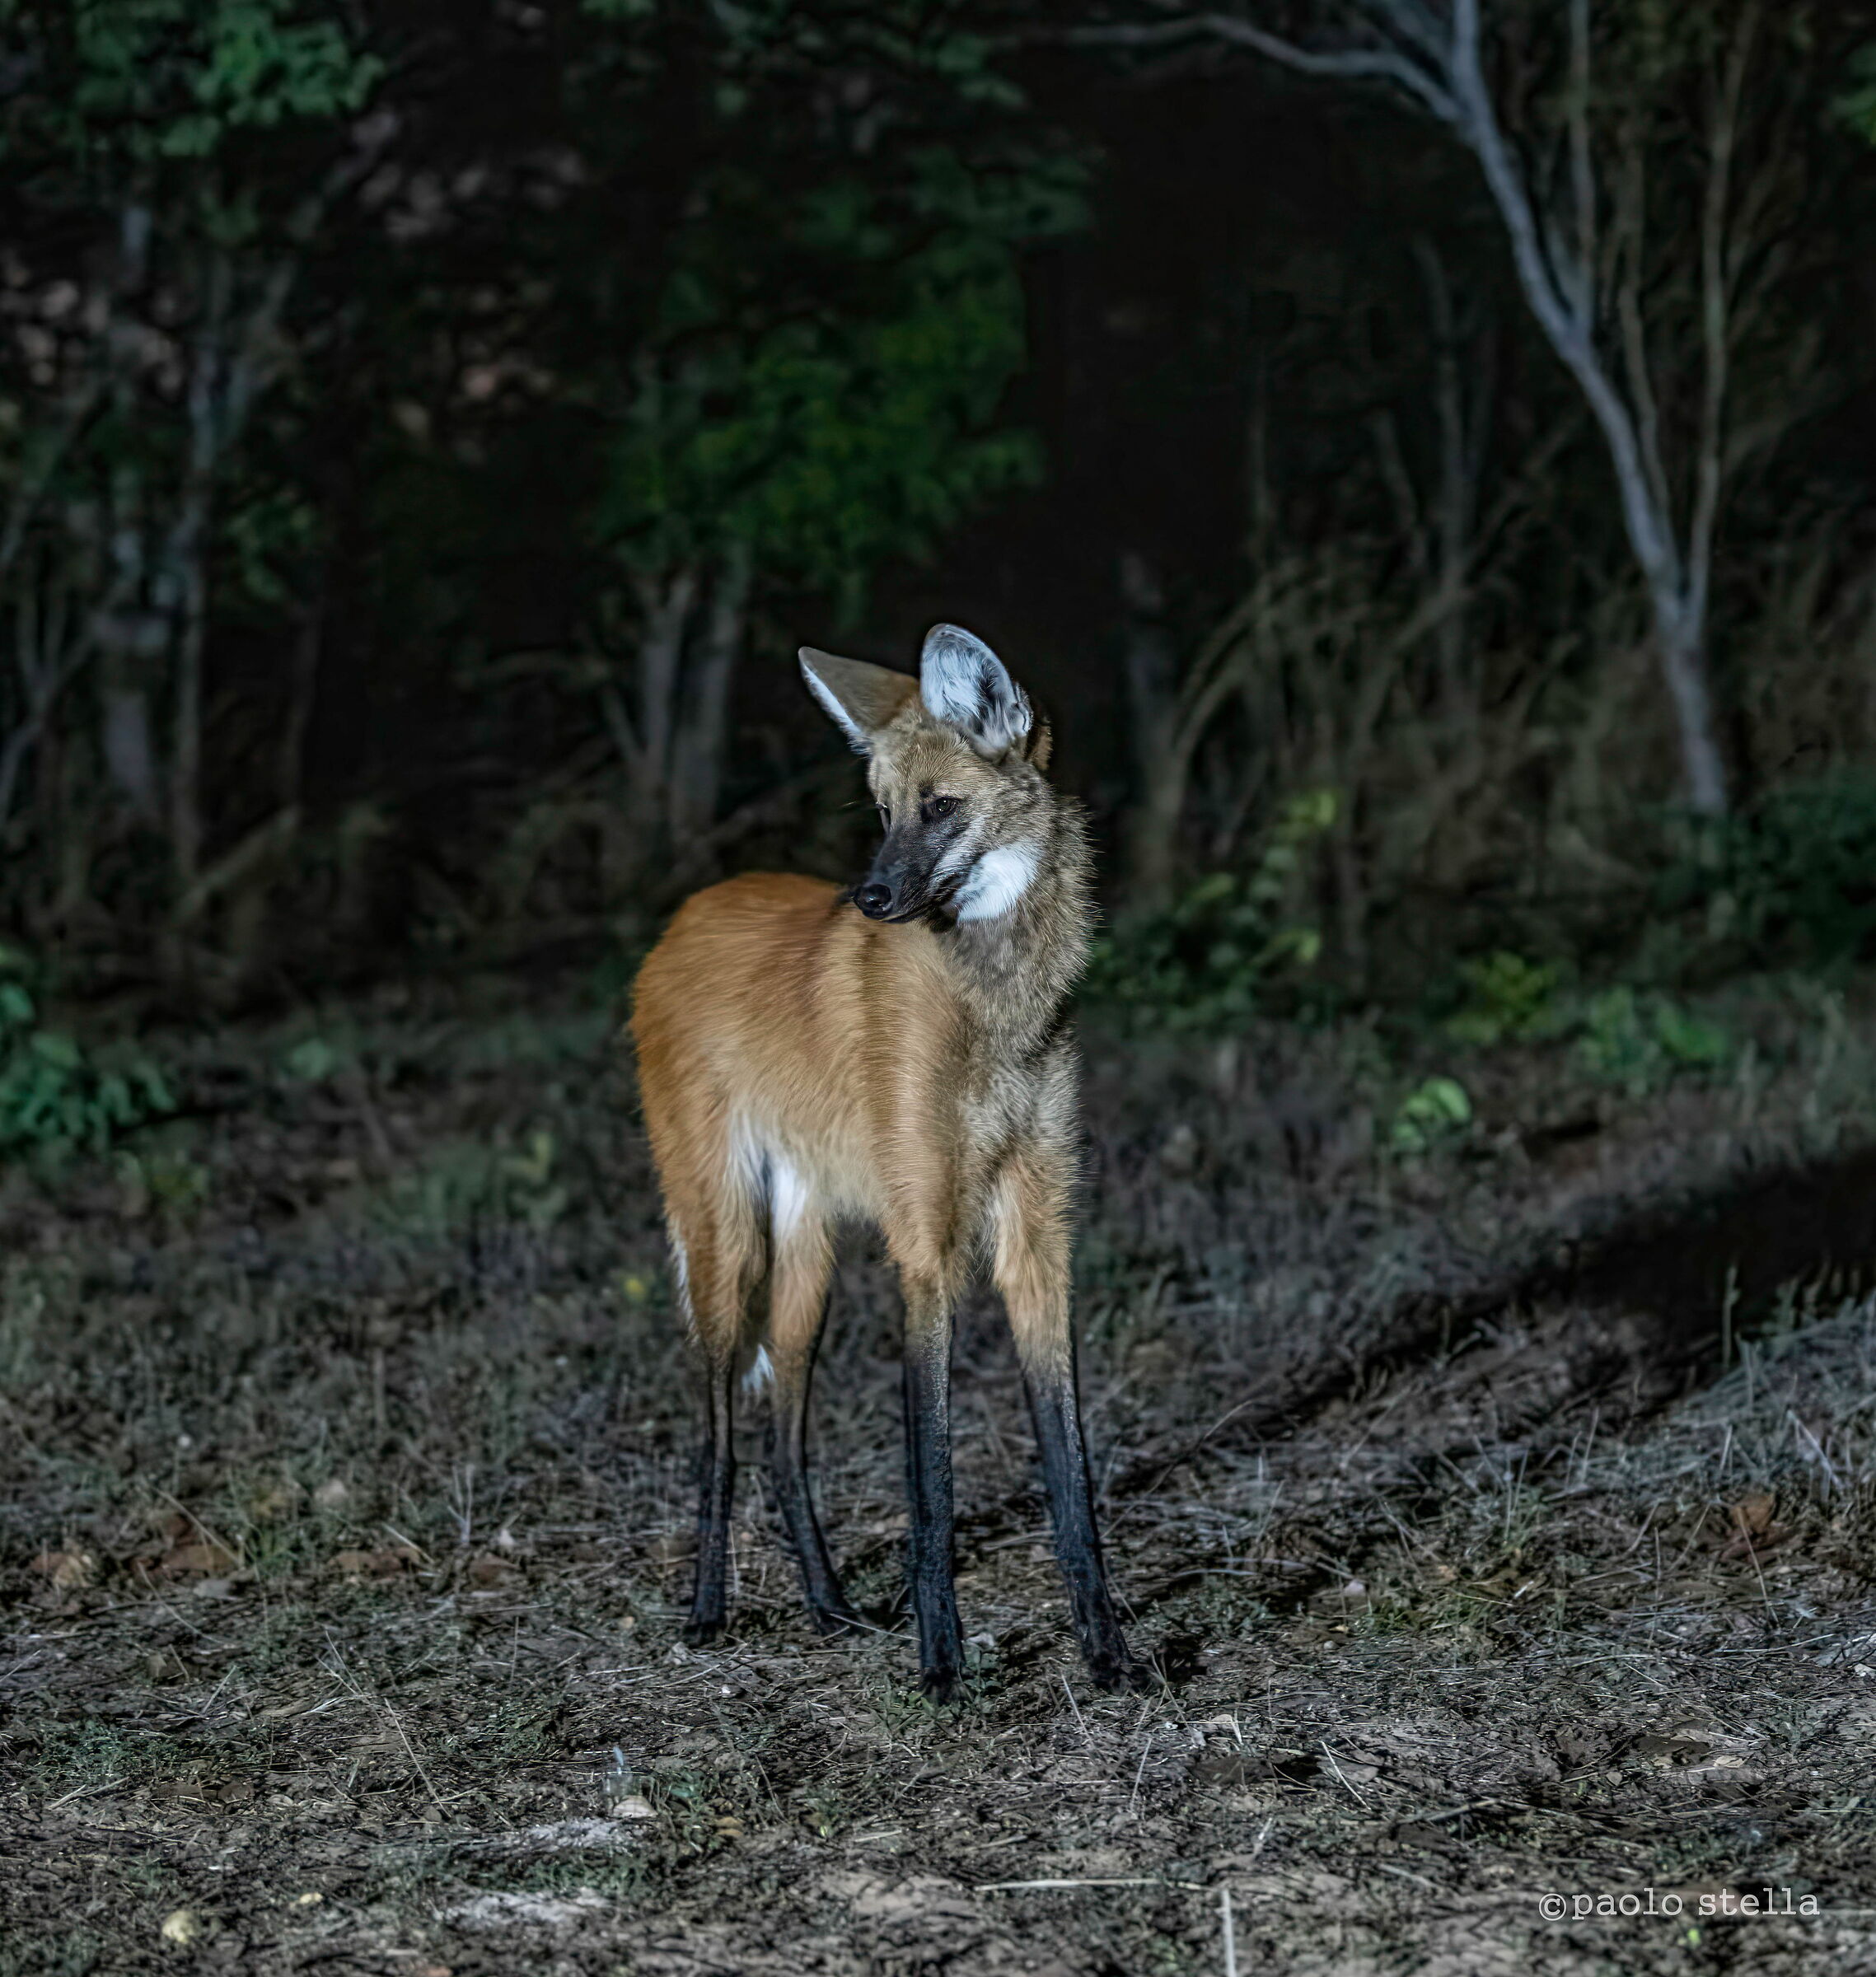 The maned wolf...